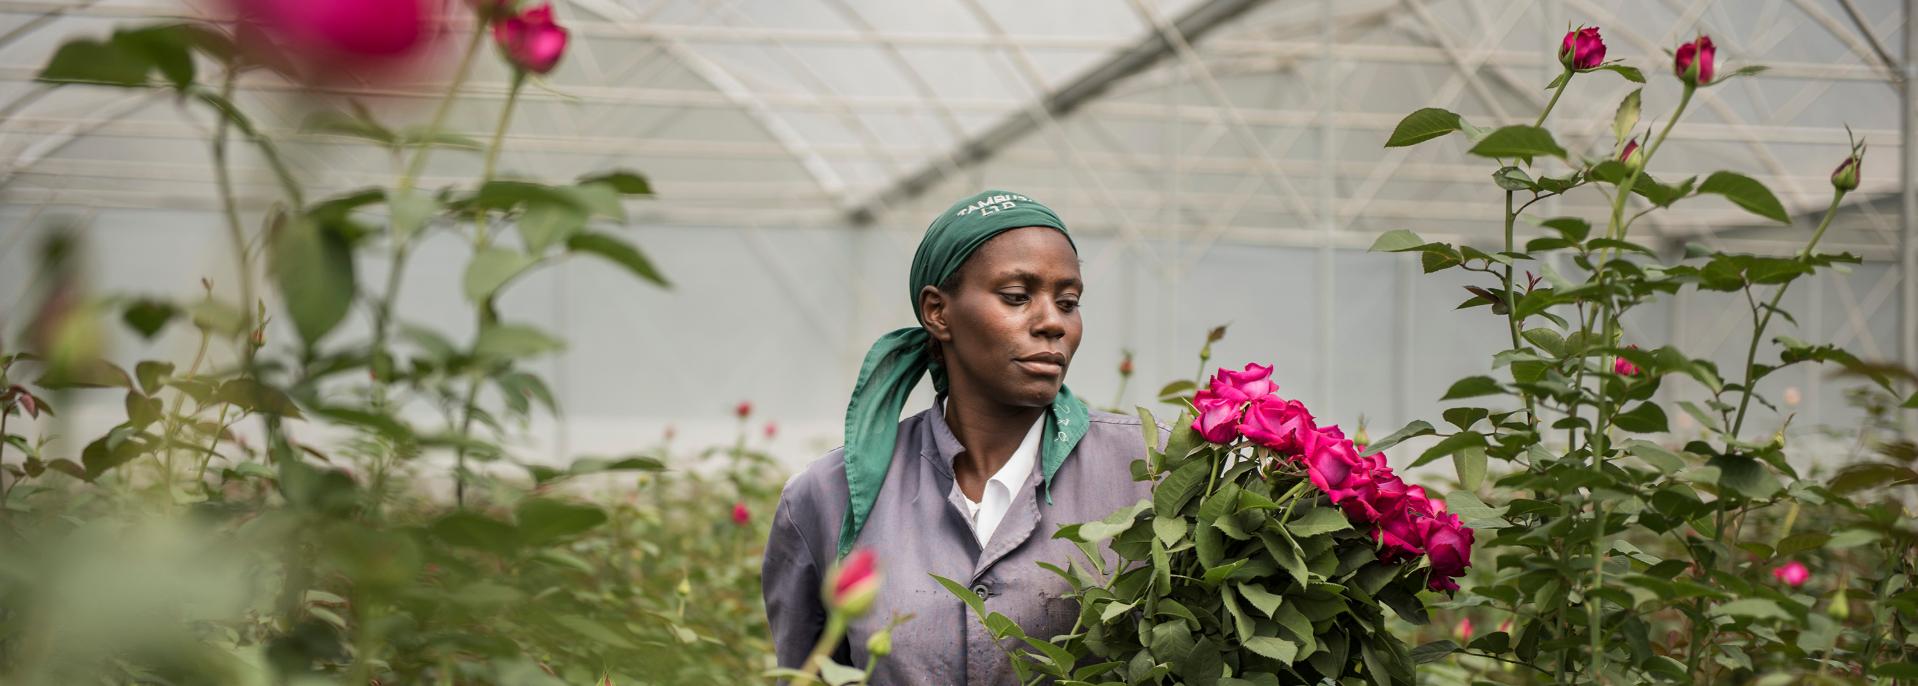 Implementing a living wage in the horticulture sector